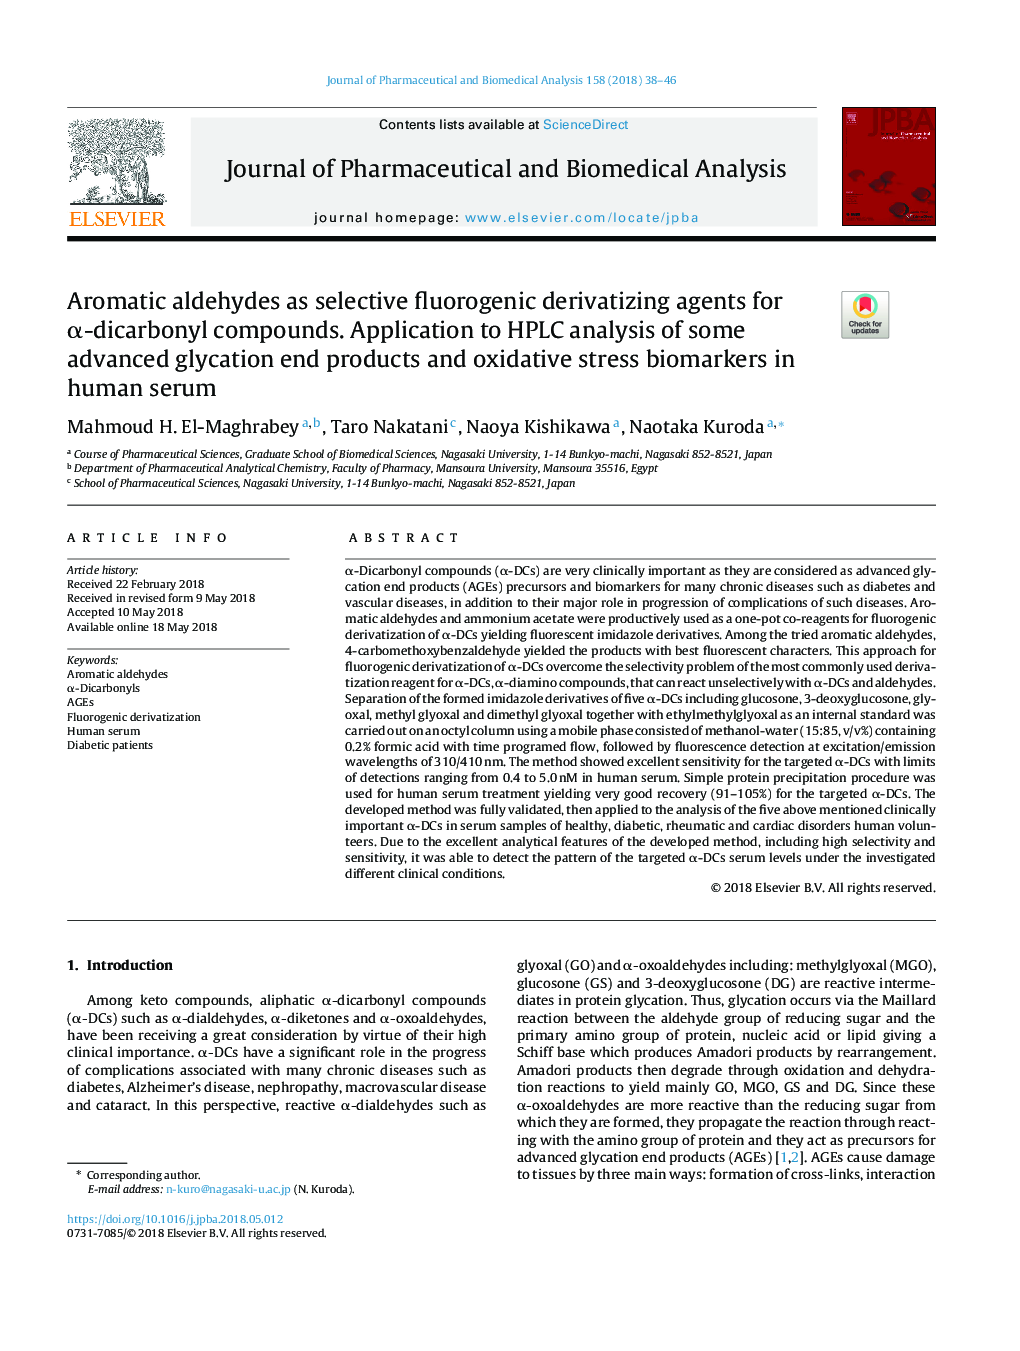 Aromatic aldehydes as selective fluorogenic derivatizing agents for Î±âdicarbonyl compounds. Application to HPLC analysis of some advanced glycation end products and oxidative stress biomarkers in human serum